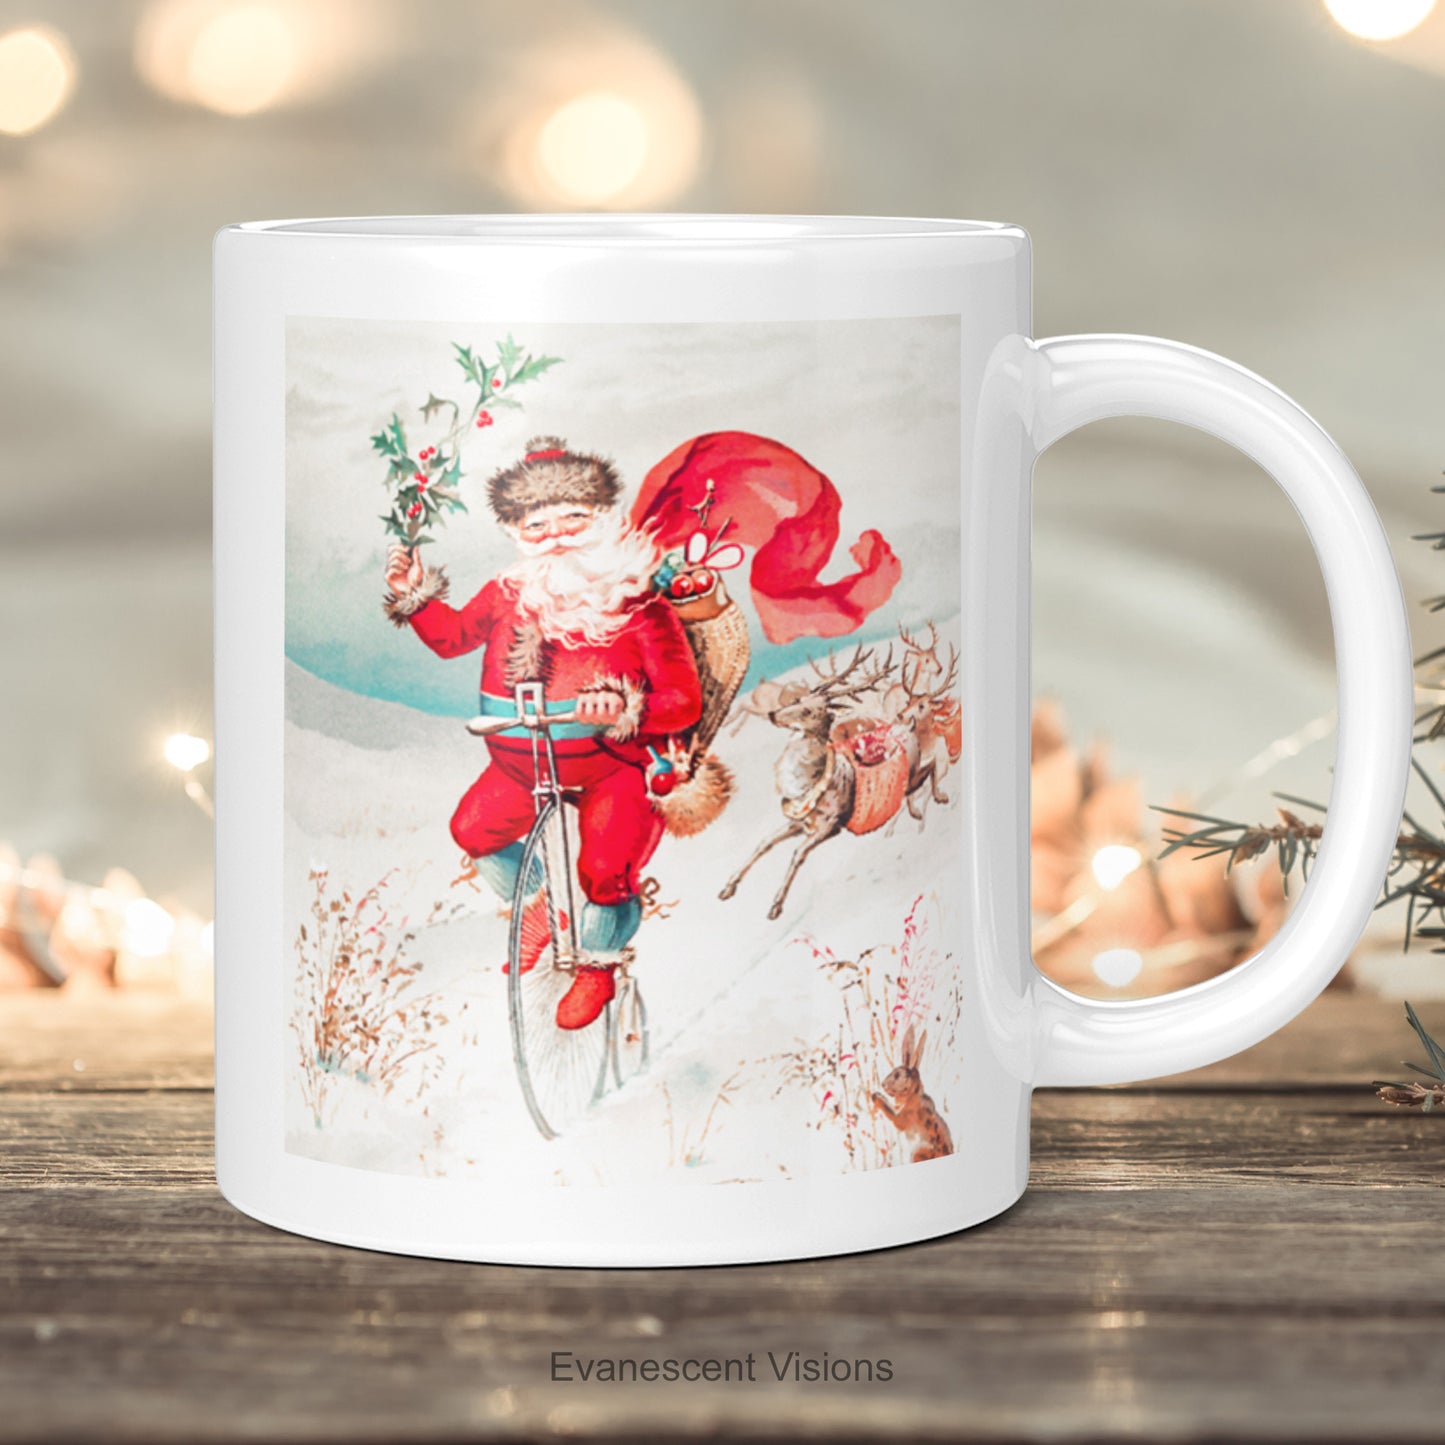 Santa Christmas Mug, with a vintage painting of Santa on a Penny Farthing bycicle. 